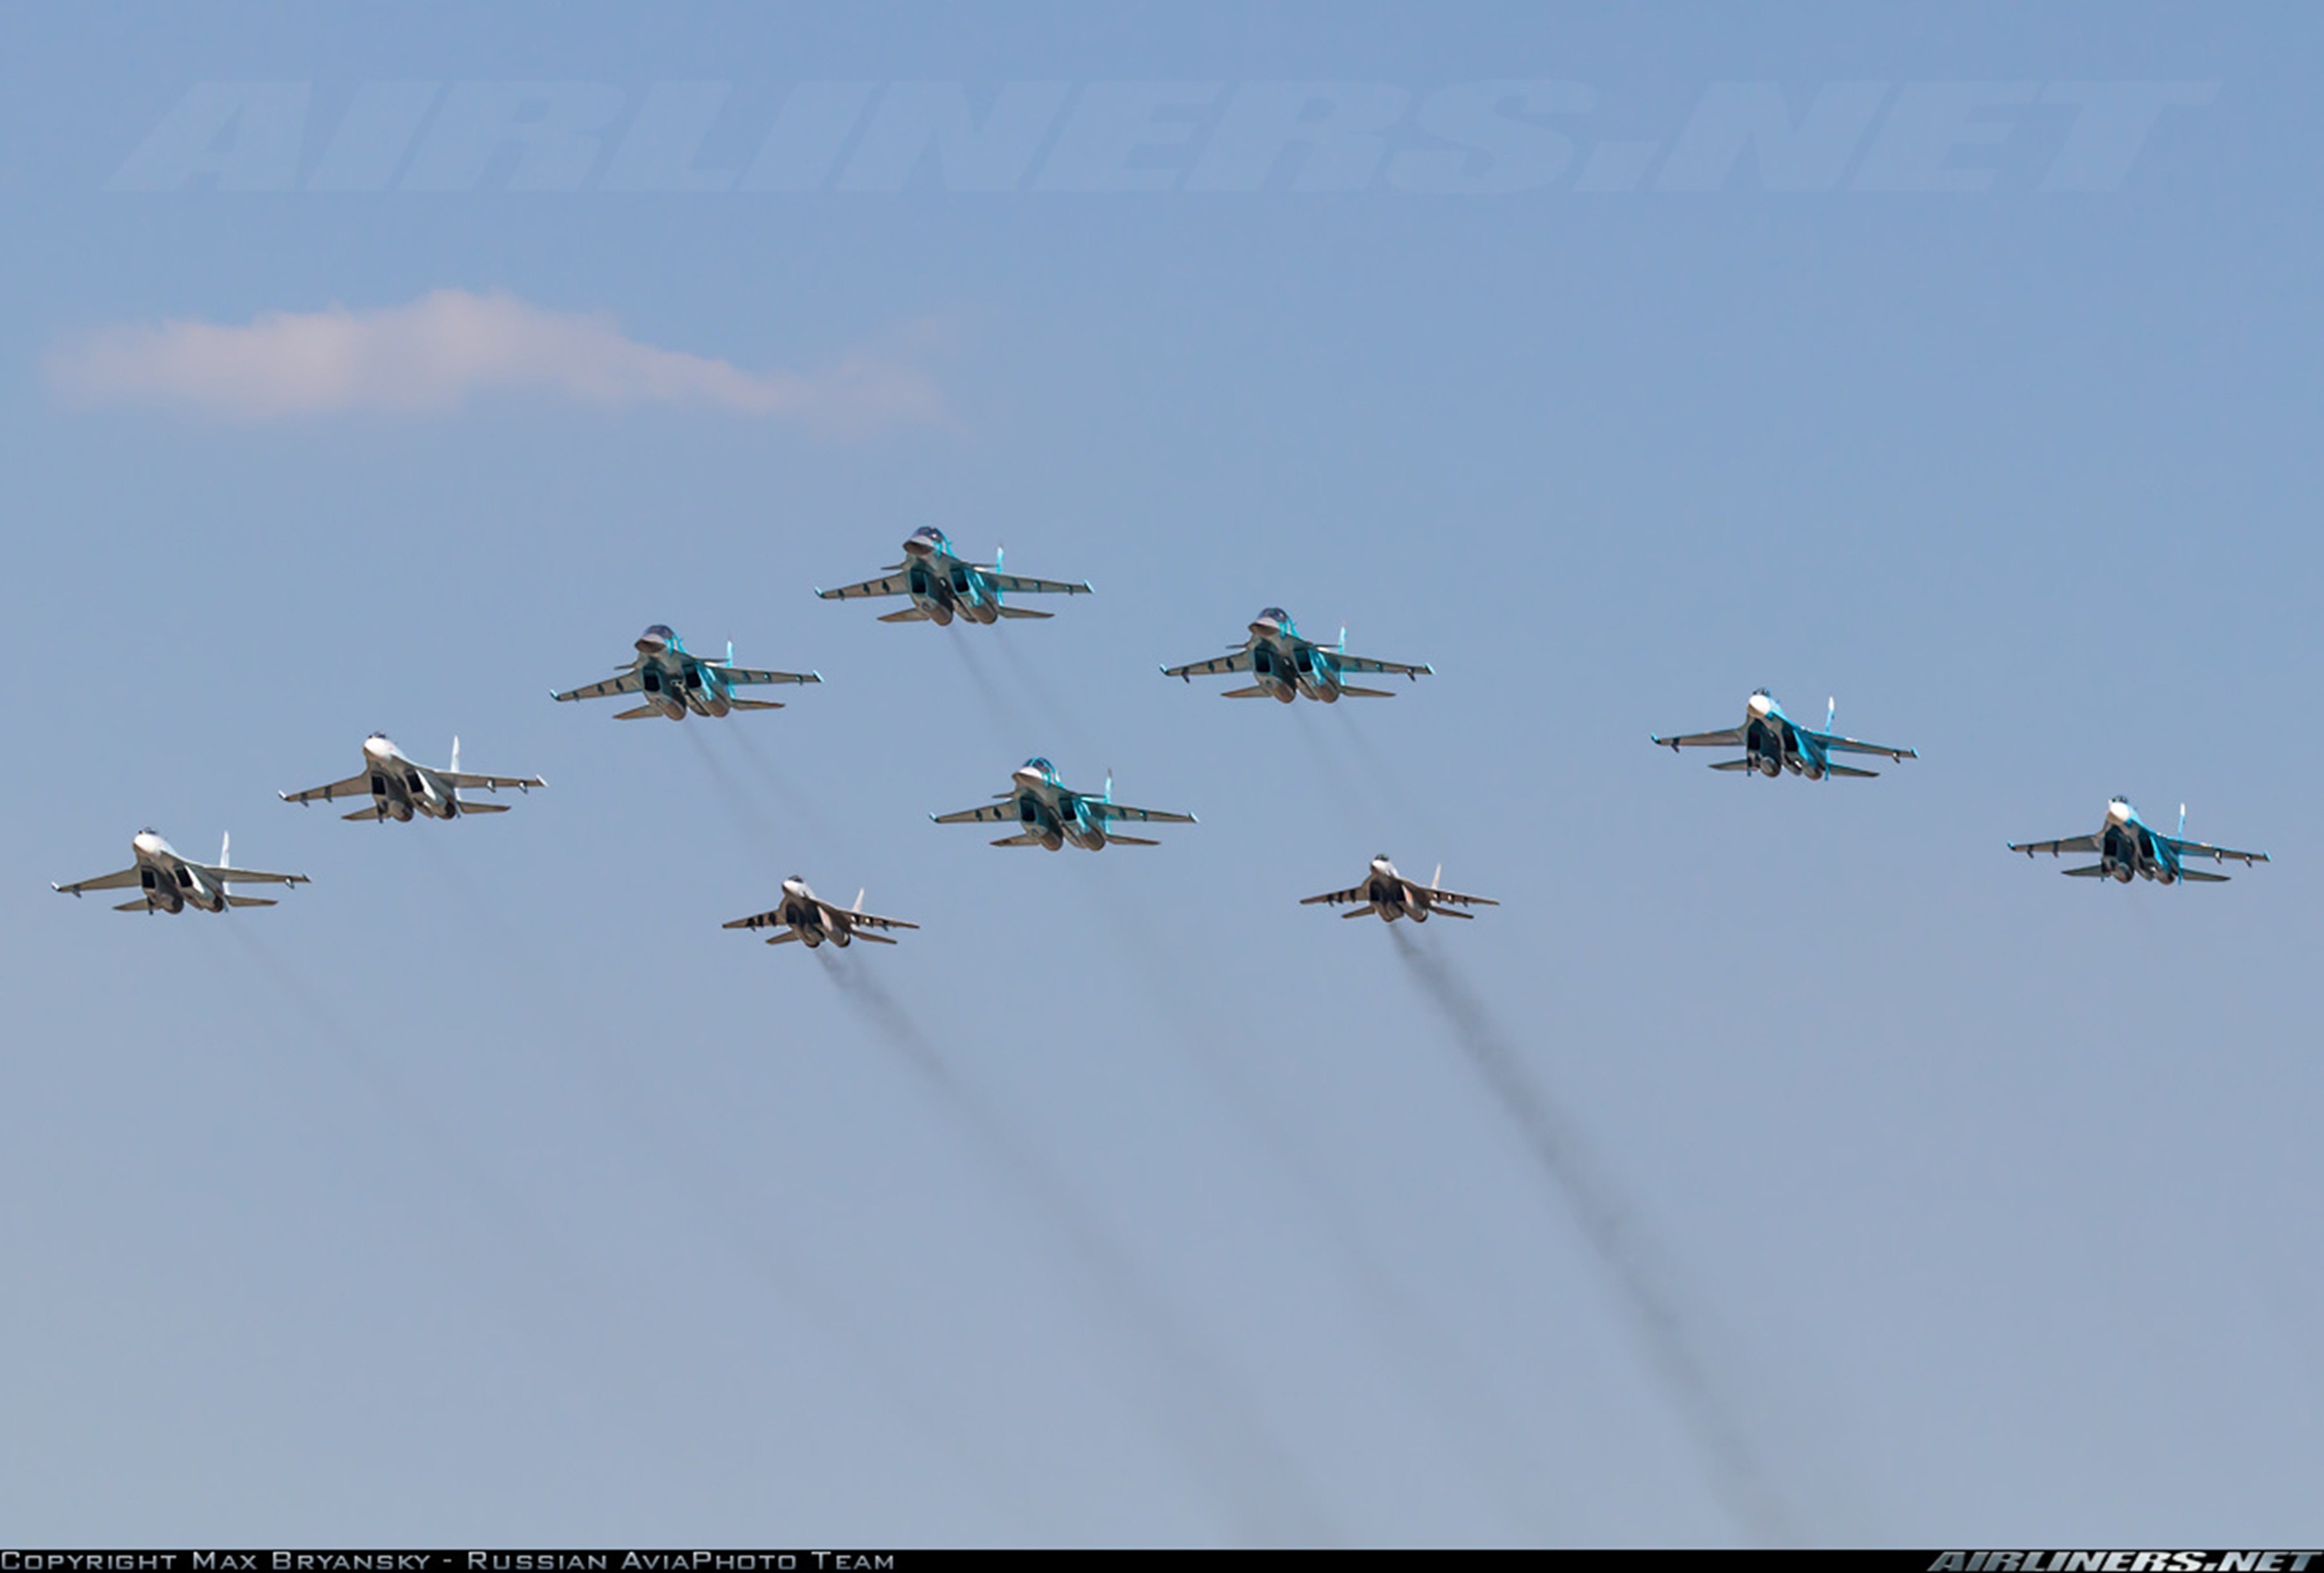 sukhoi, Su34, Russia, Russian, Air, Force, Red, Star, Aircraft, Jet, Fighter, 4000x2250 Wallpaper